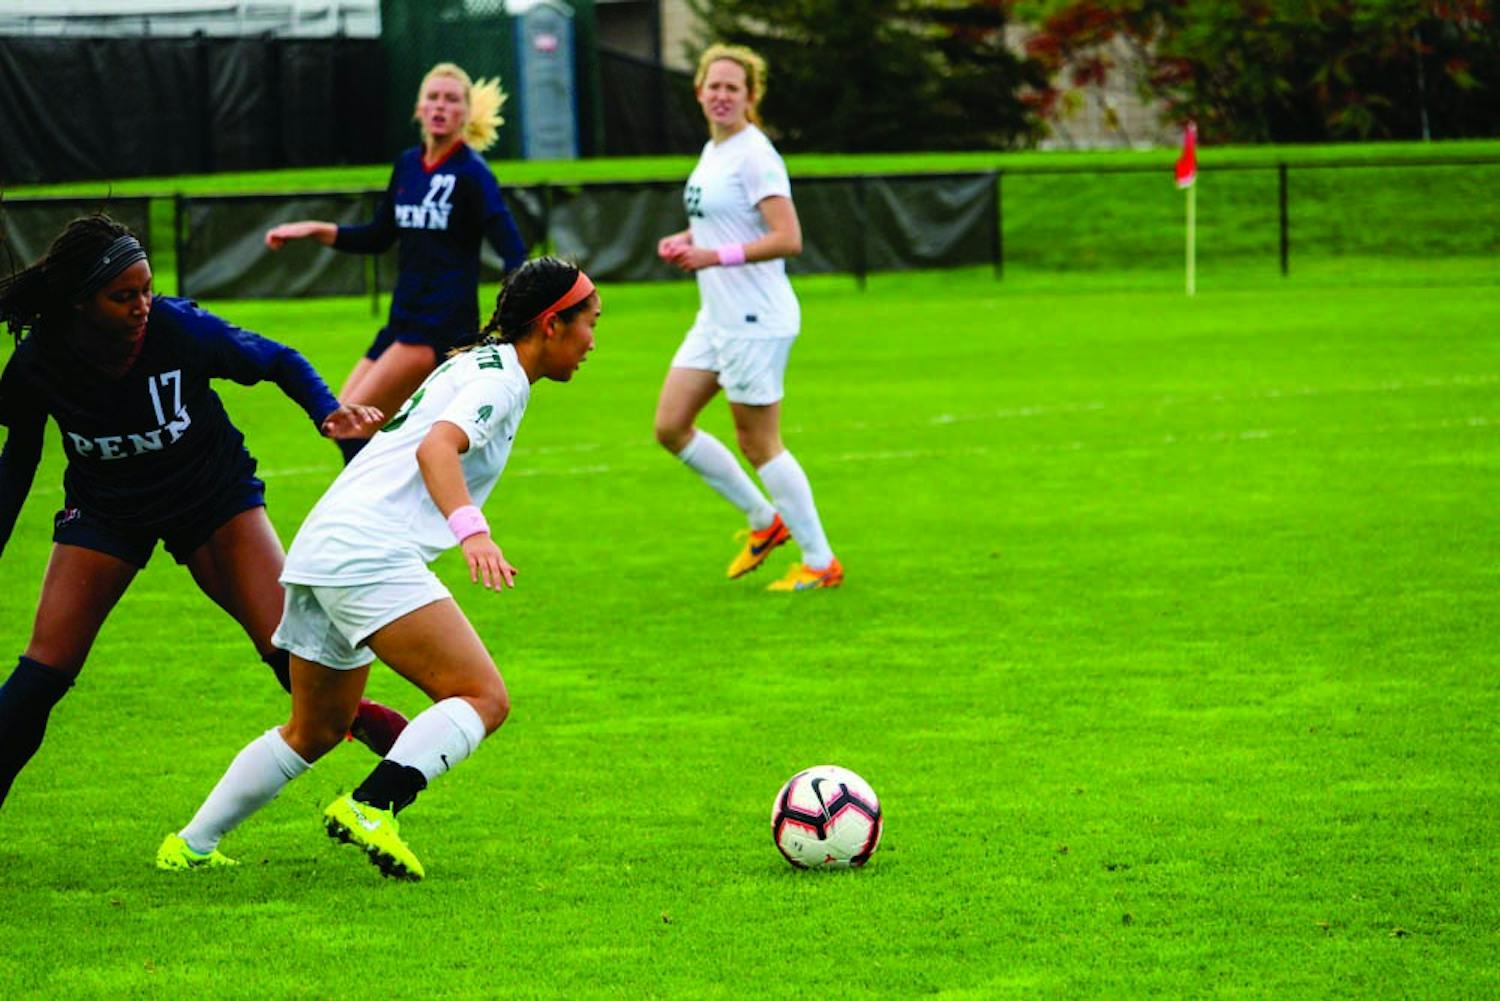 Women’s soccer finished the season with 10 wins after a 2-1 win over Cornell University.